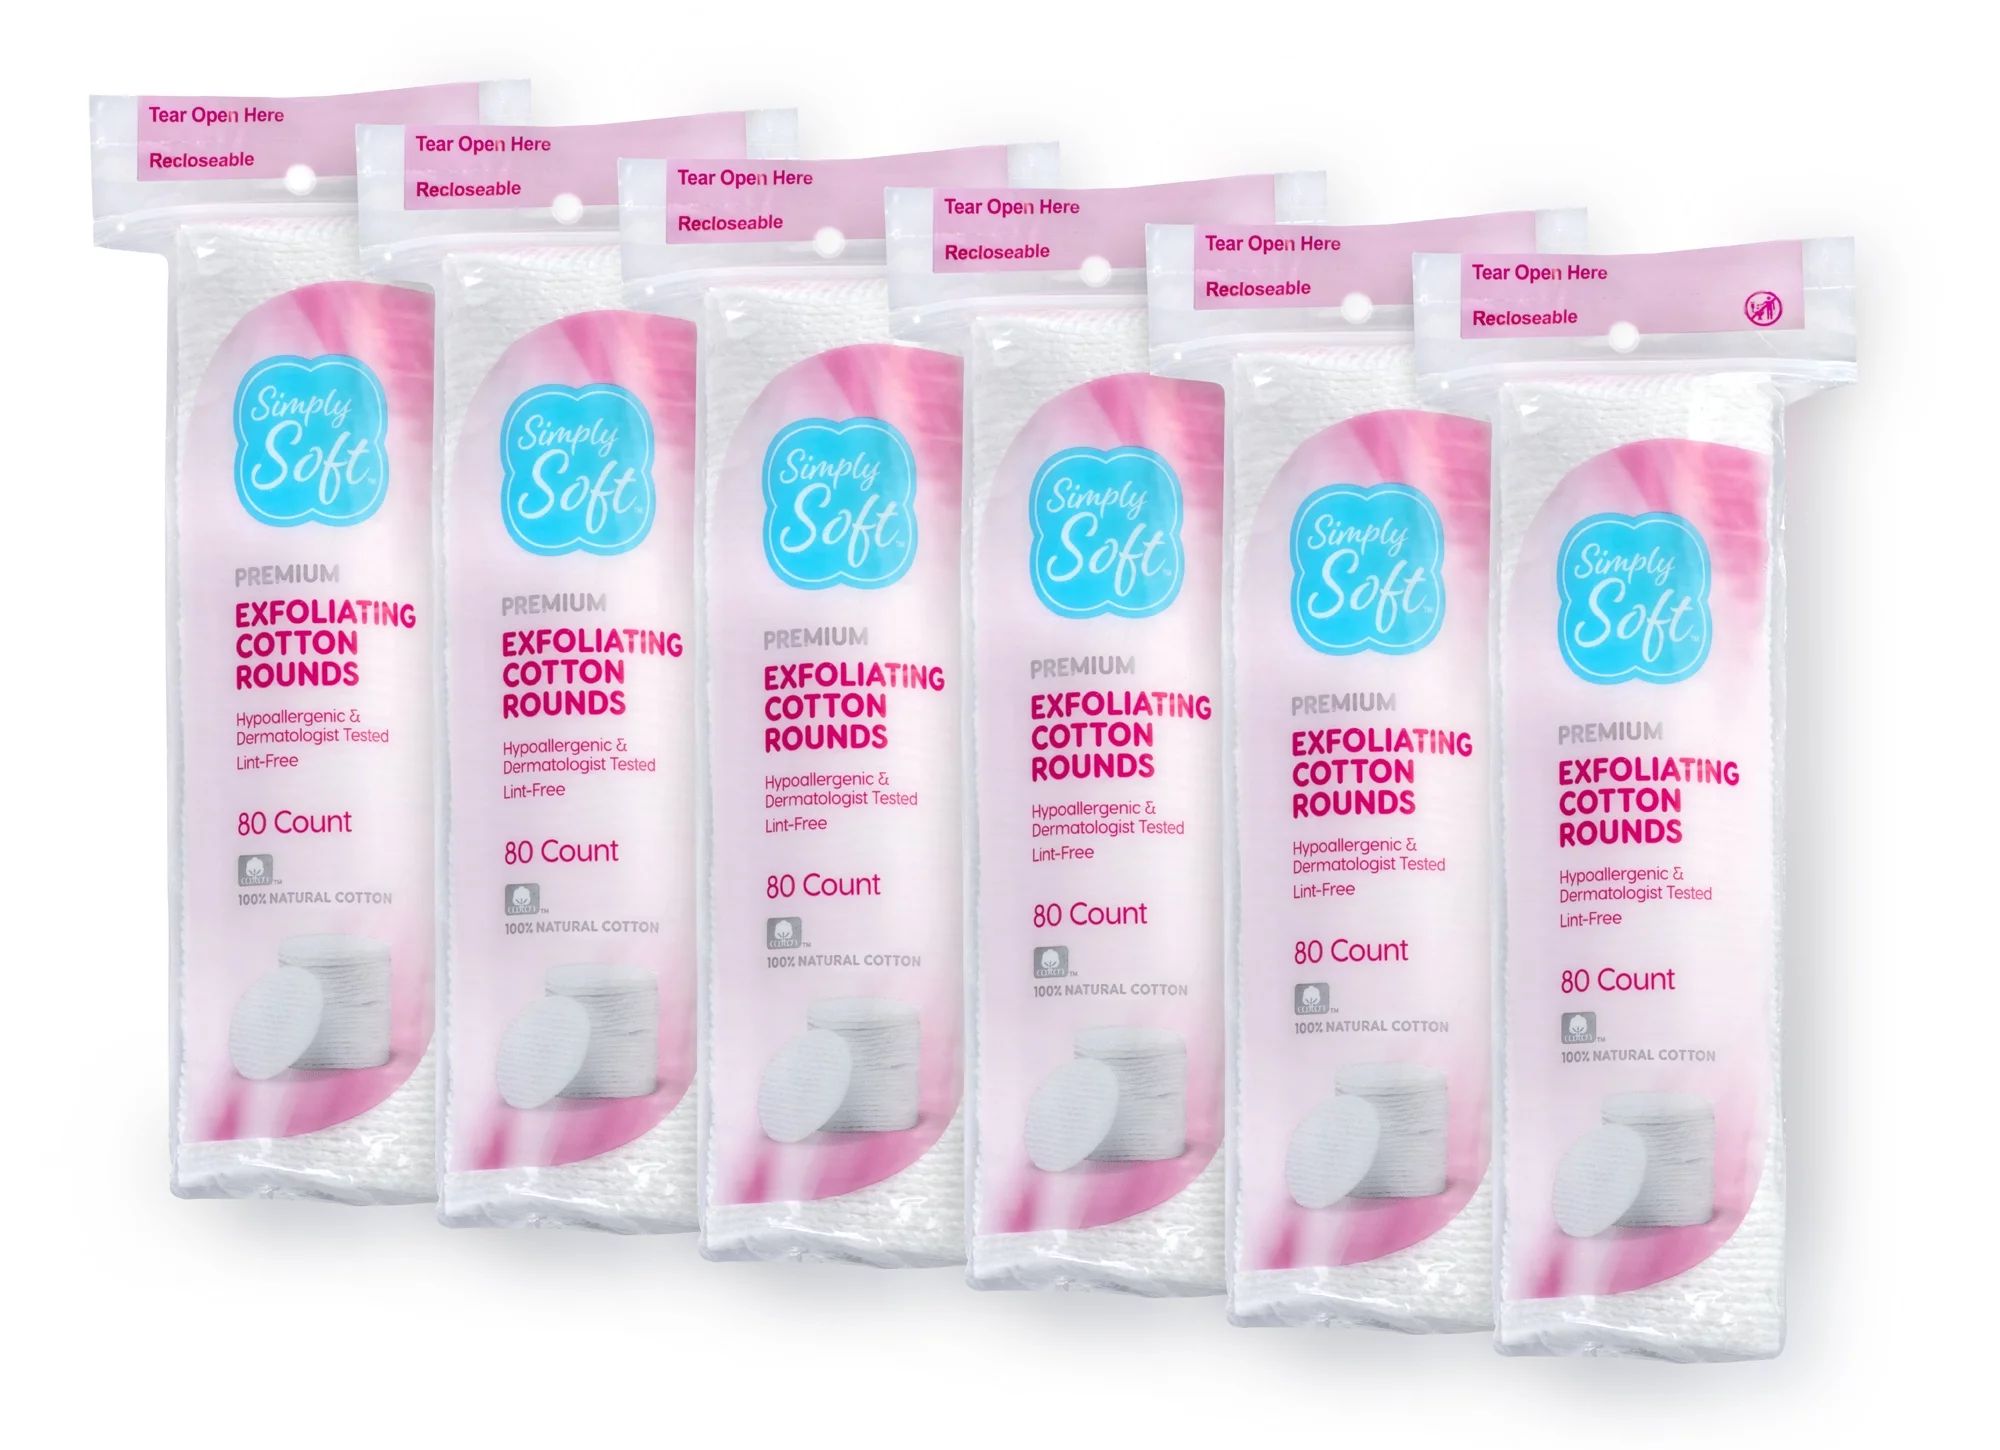 Simply Soft Hypoallergenic Exfoliating Dual Texture Cotton Rounds, 80 Per Pack, 6 Total Packs | Walmart (US)